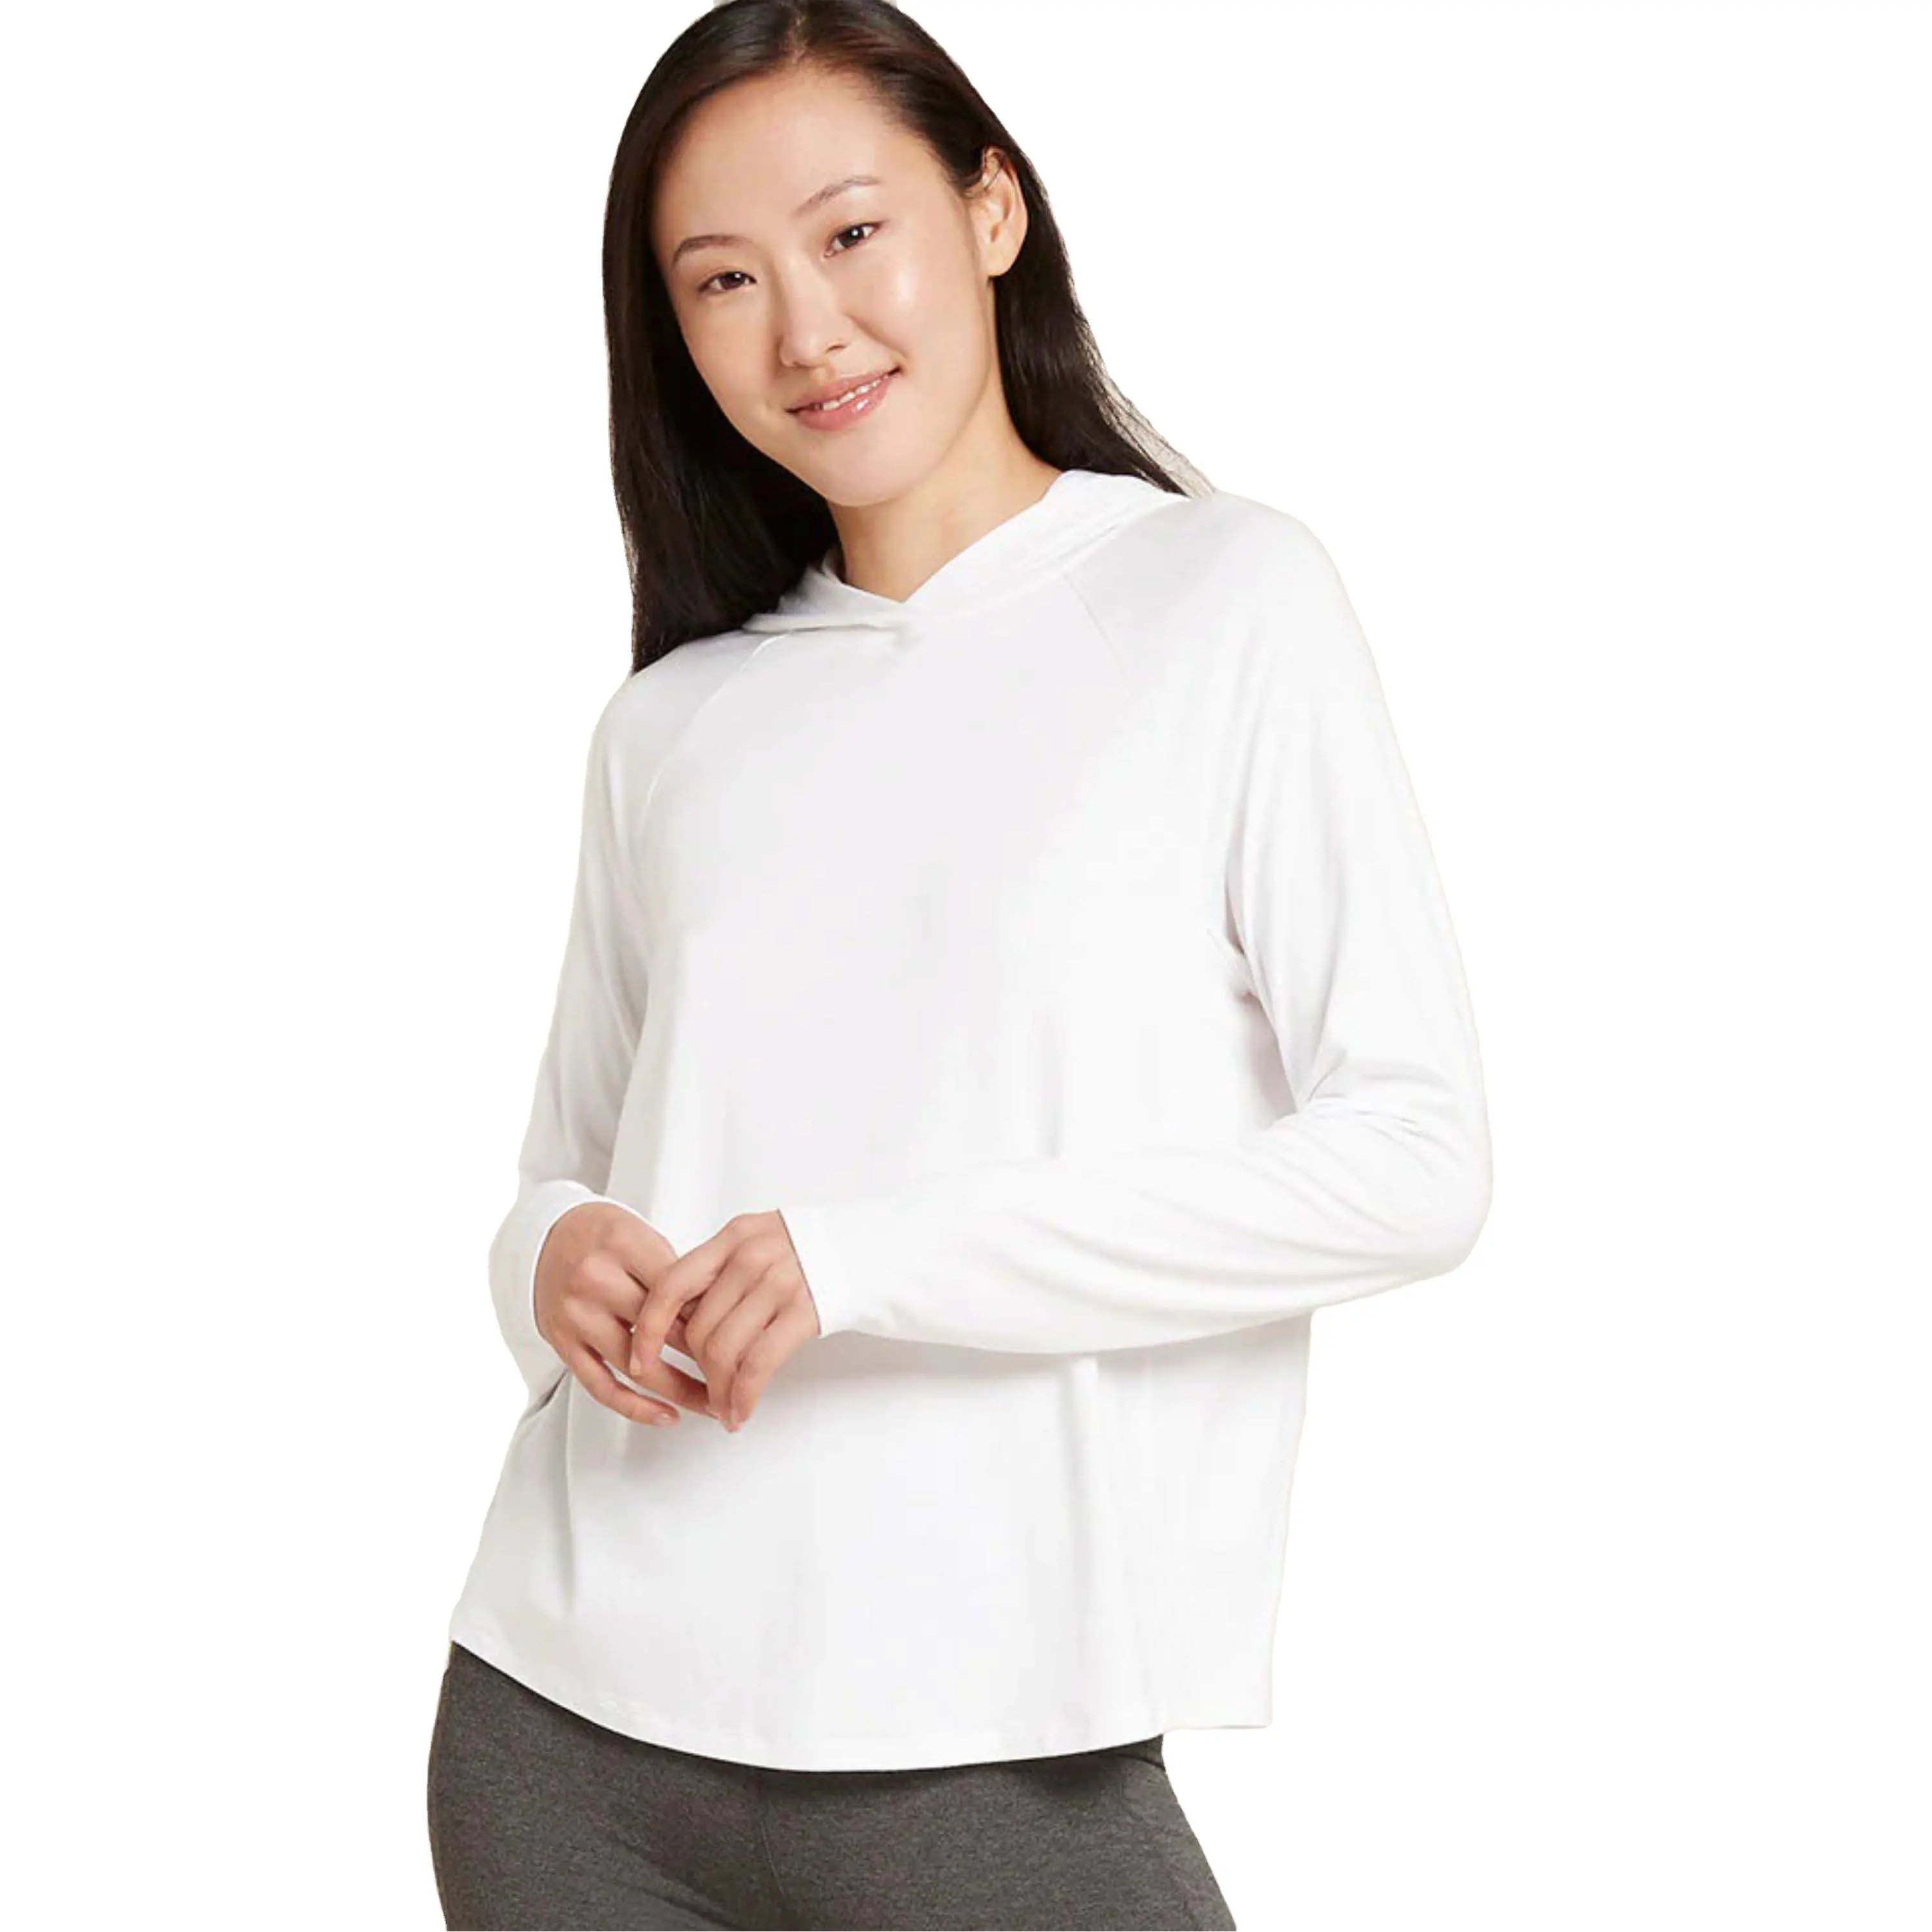 Stylish Long-Sleeve Women Hoodie Tee | Ideal for Sports Outdoor Activities and Leisure Available in Various Colors